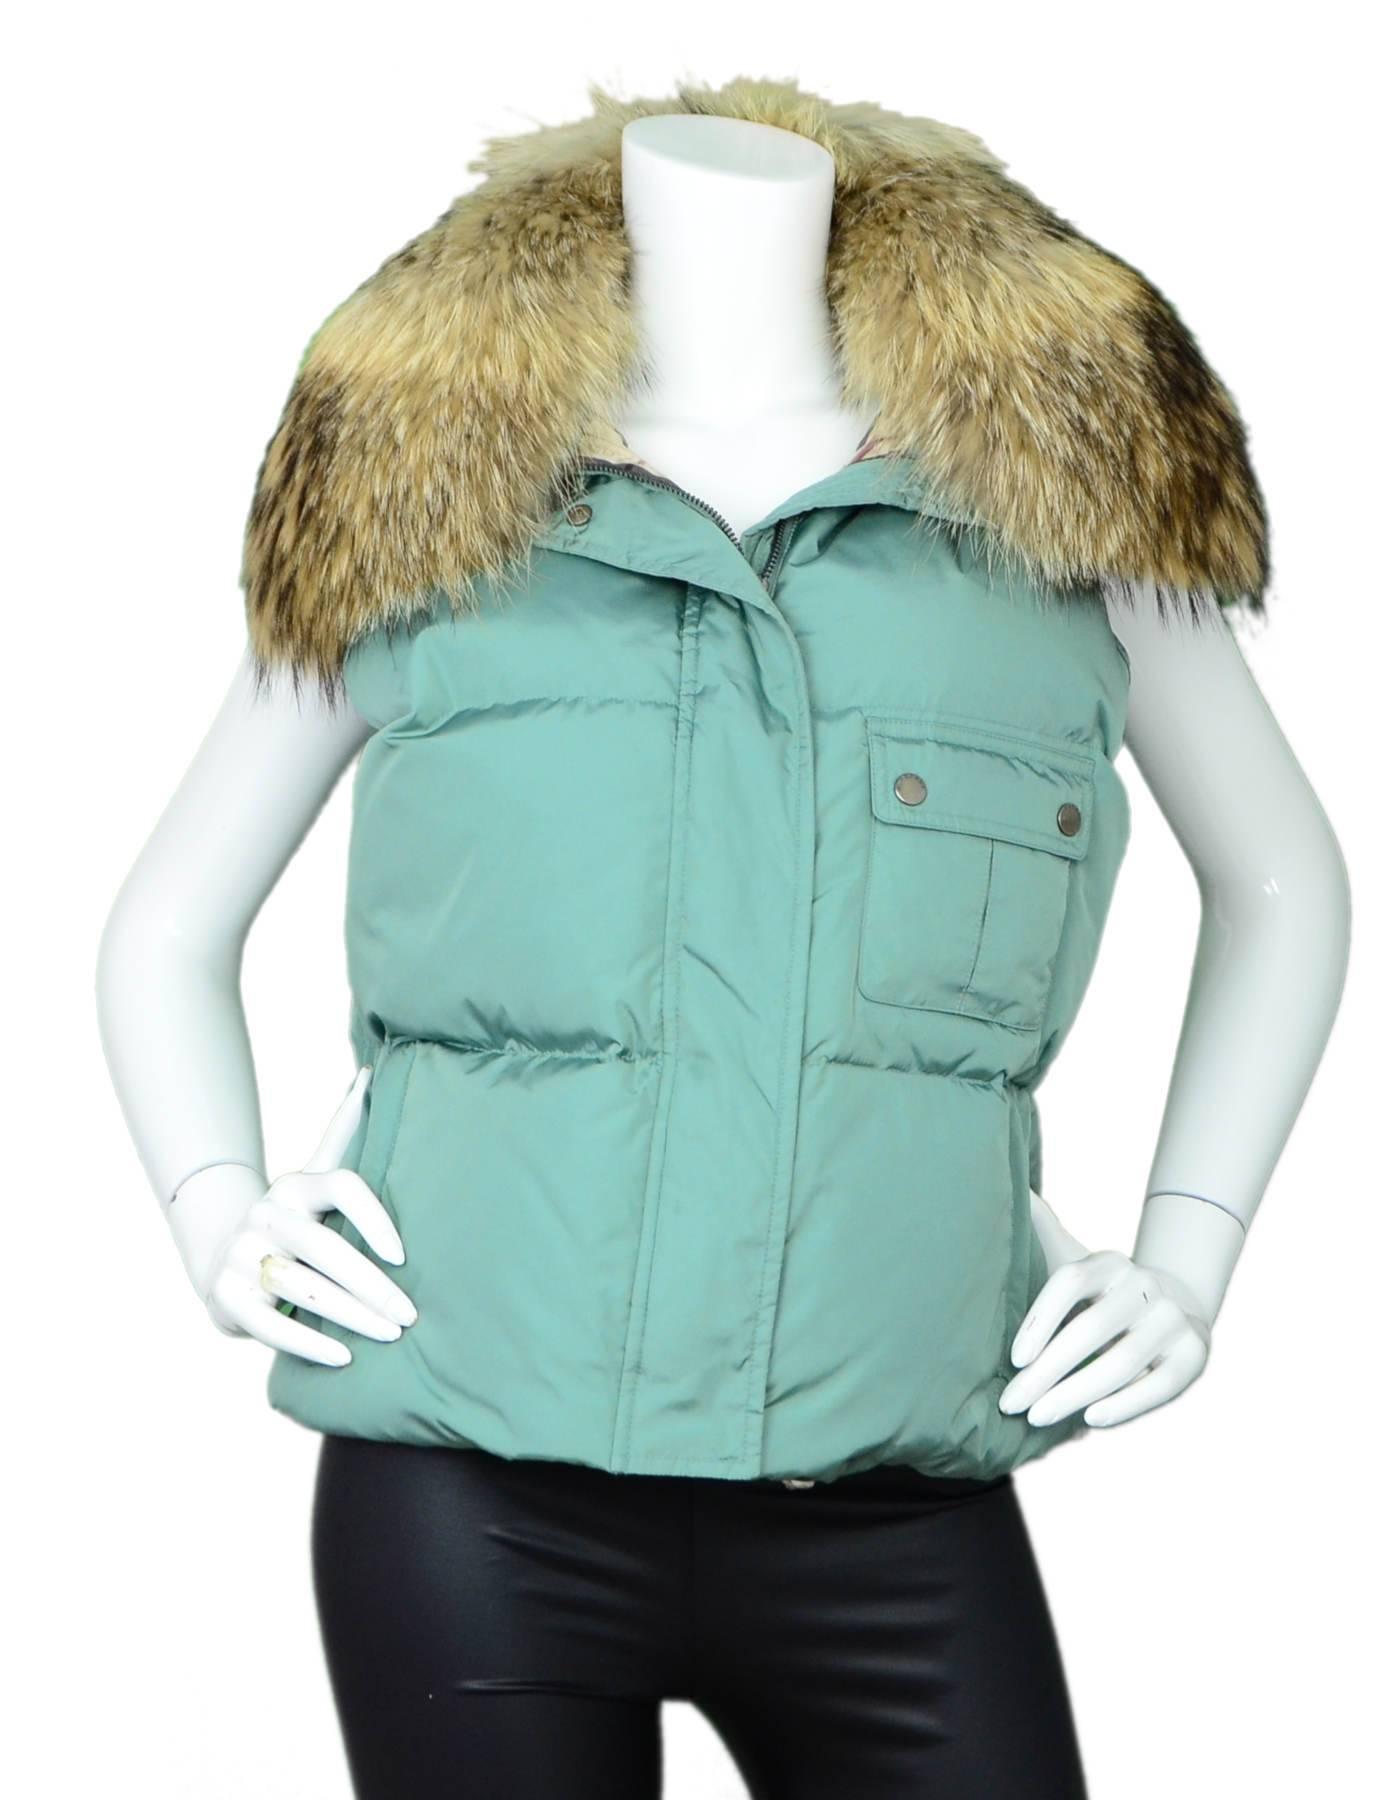 Burberry Seafoam Green Vest with Raccoon Collar Sz L

Fur collar can be removed

Made In: China
Color: Seafoam green
Composition: 97% nylon, 3% polyururethane
Closure/Opening: Front zip and button closure
Exterior Pockets: Side zip pockets and snap